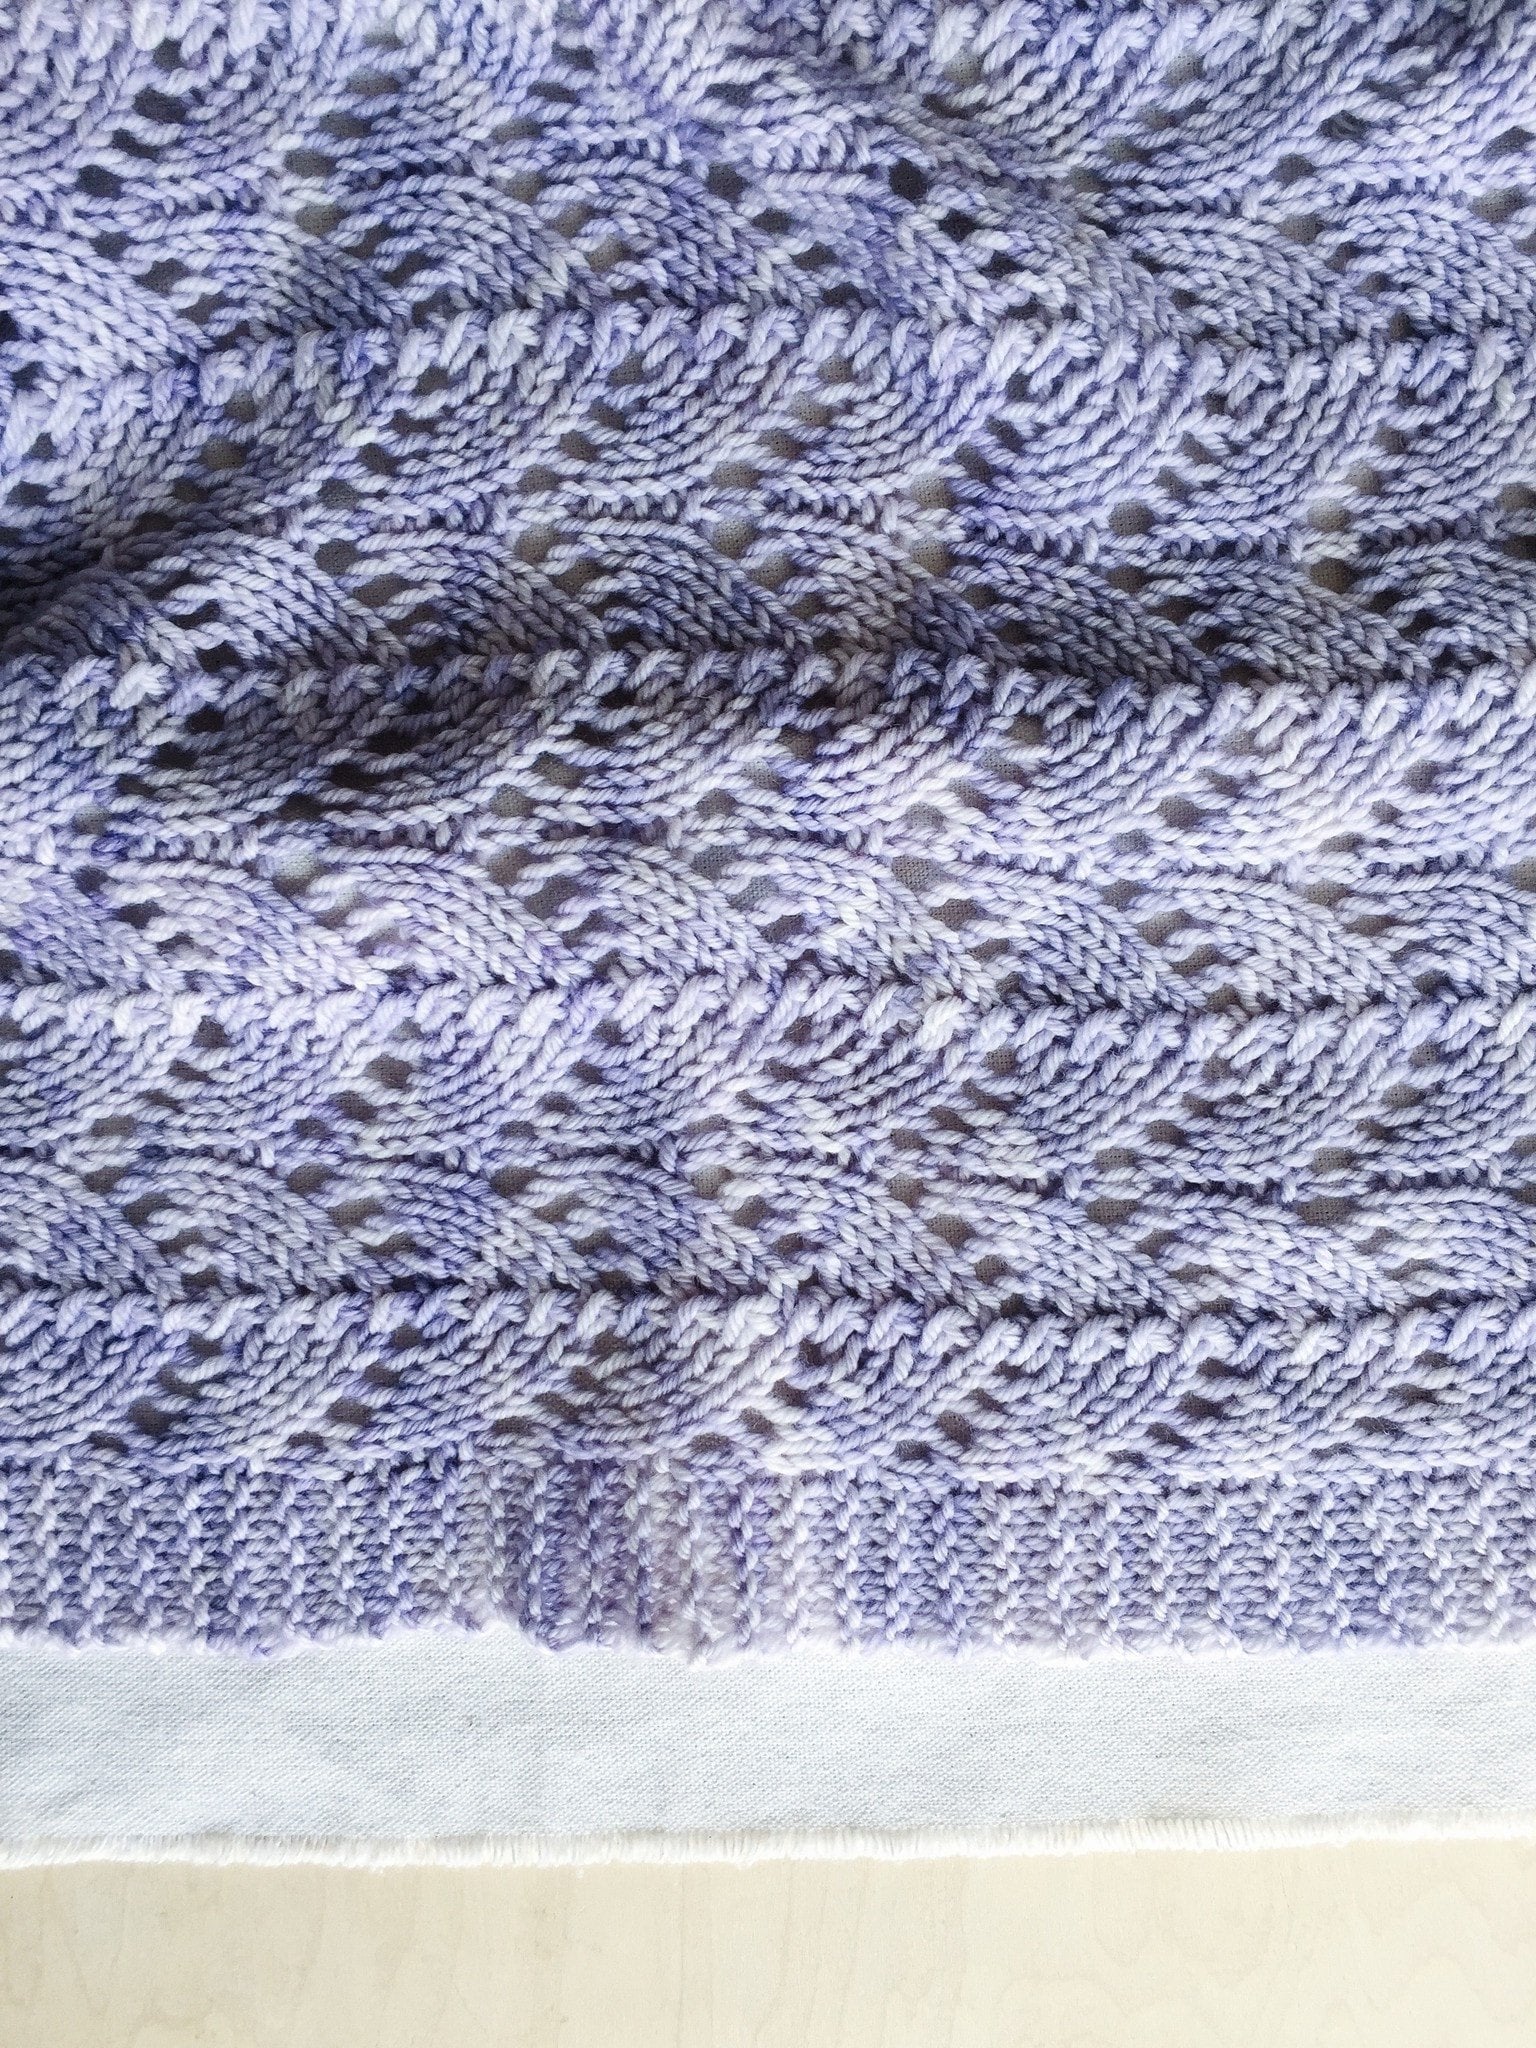 Cable And Lace Blanket in Bernat Baby Sport, Knitting Patterns